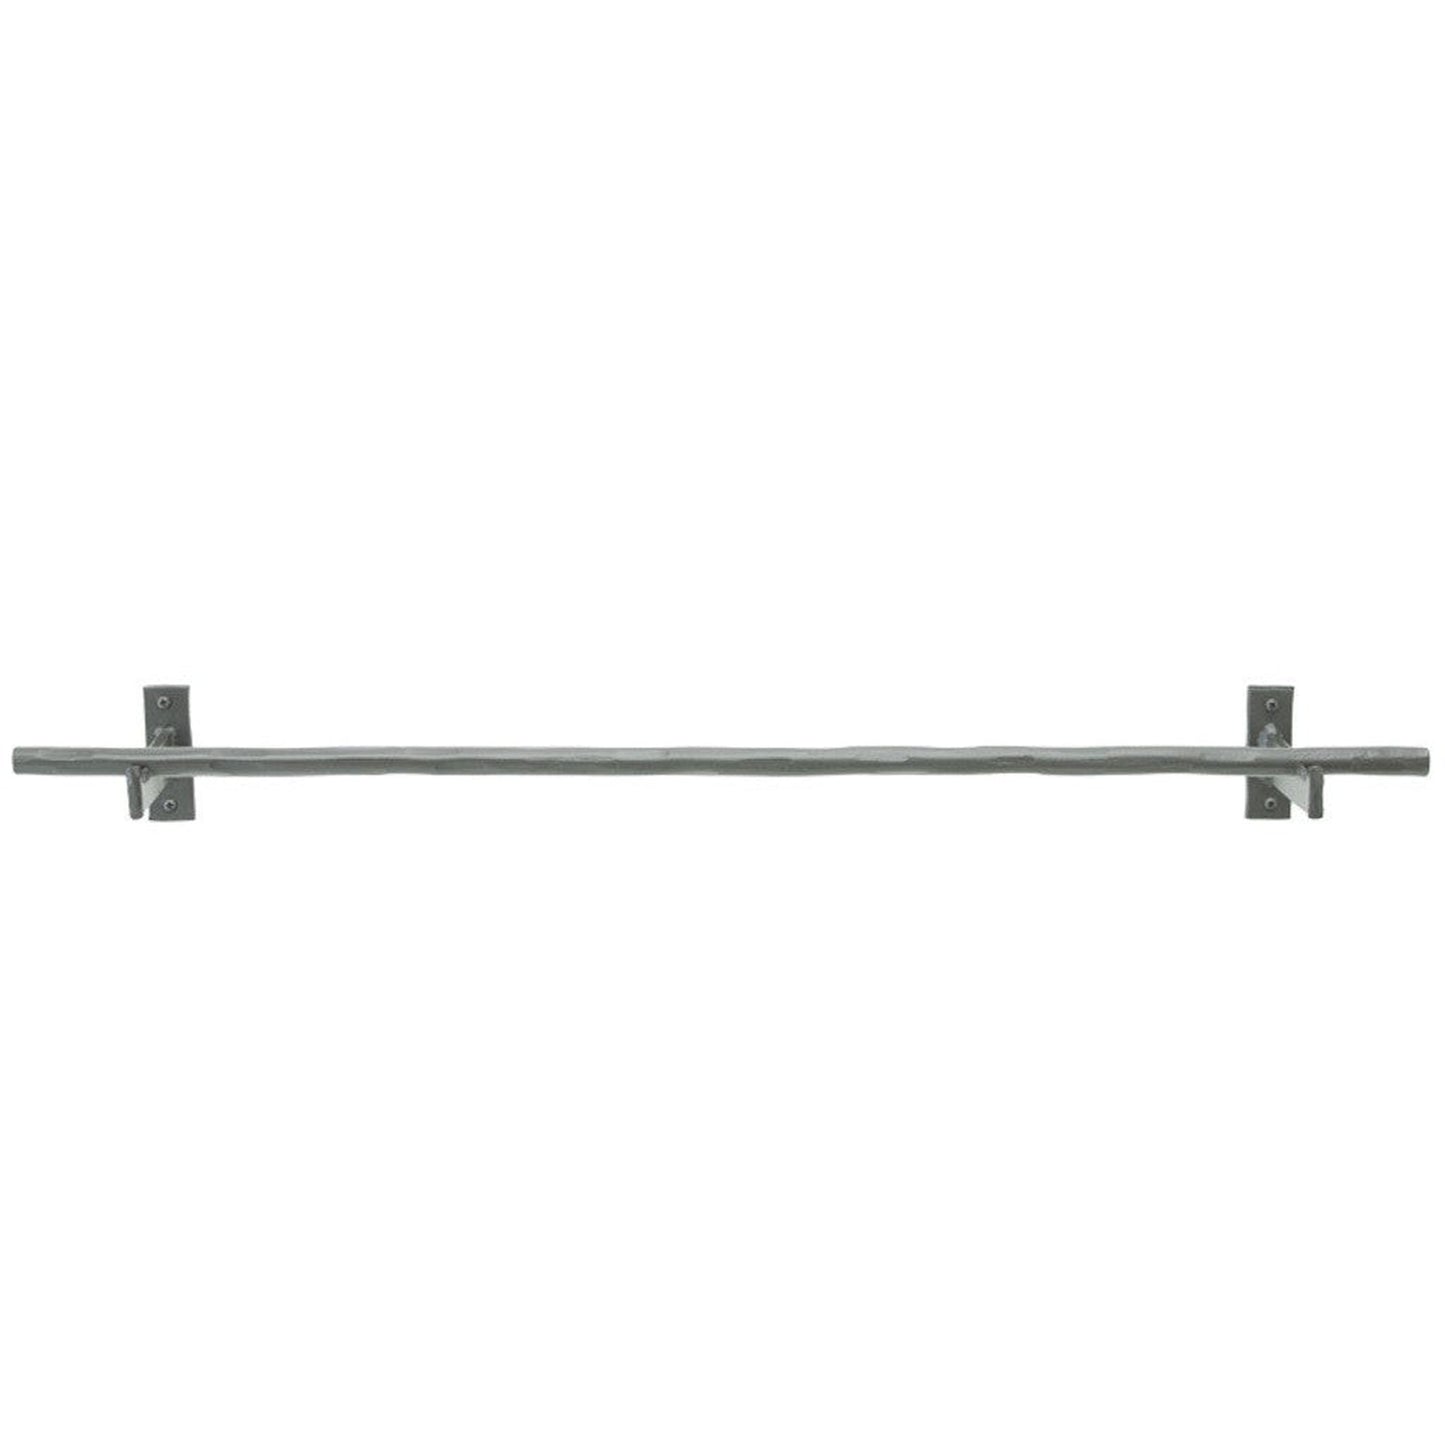 Stone County Ironworks Ranch 24" Woodland Brown Iron Towel Bar